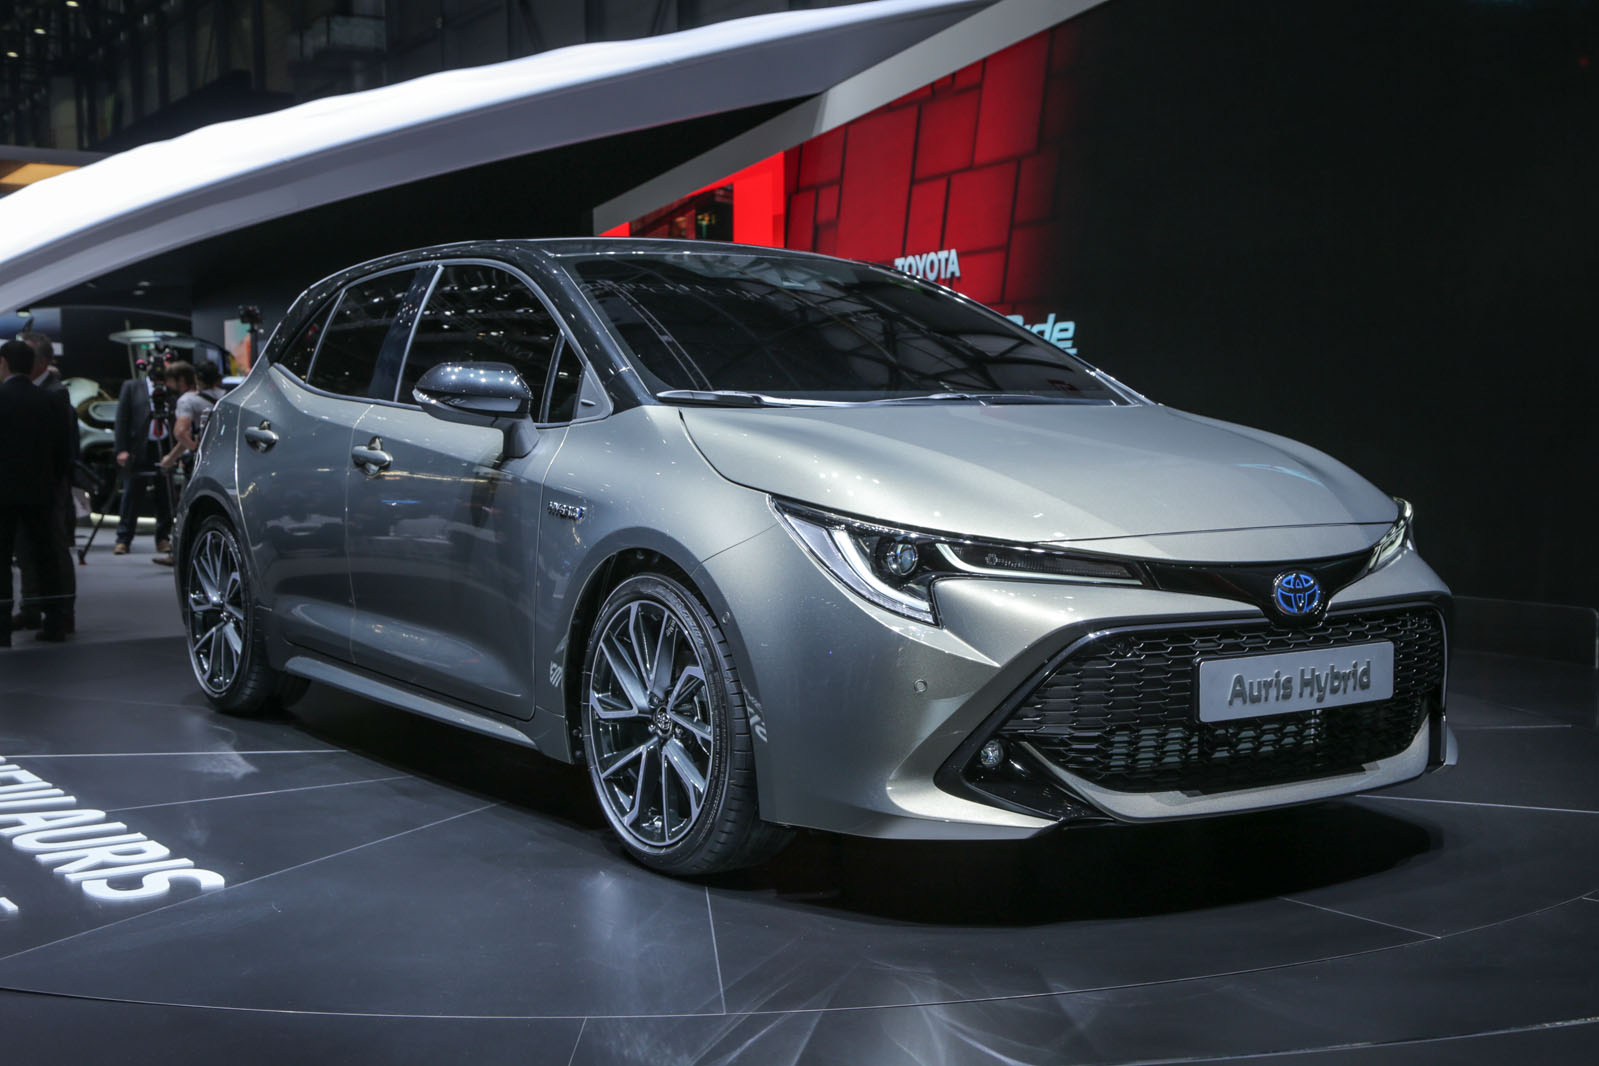 Toyota Auris Hybrid Wagon: Are You Missing Out On Europe's Prius V  Alternative?